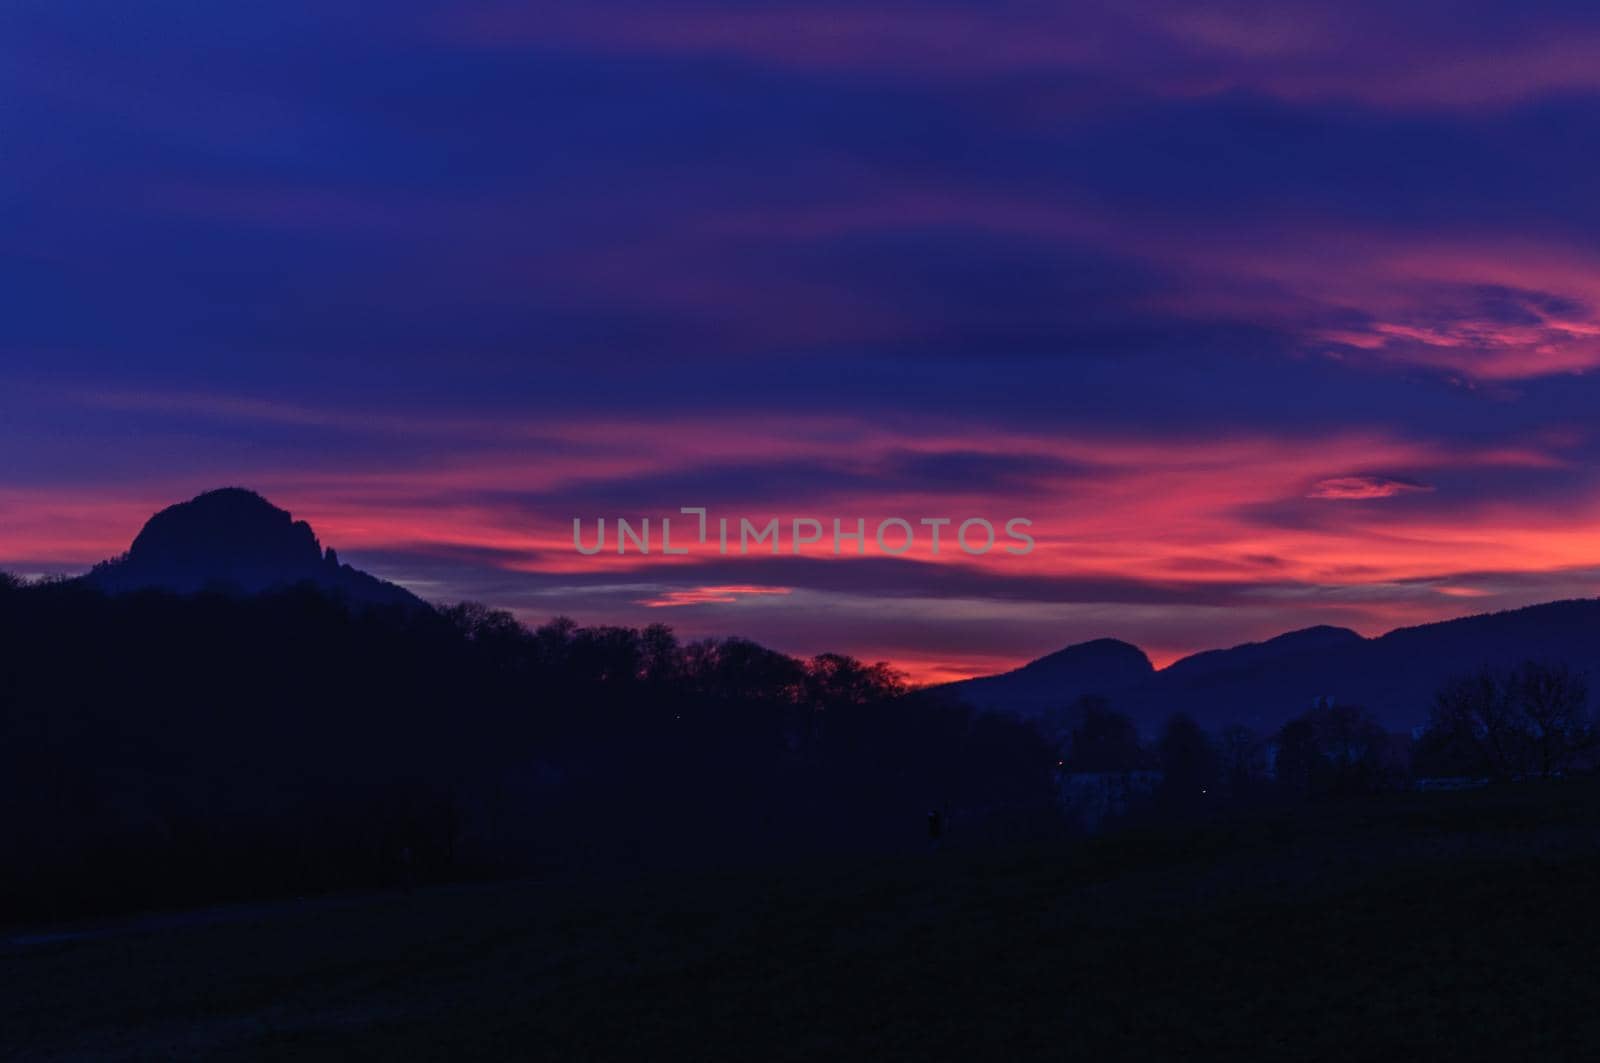 Sunset over Mountains. Night dark blue and pink sky and silhouette of mountain.